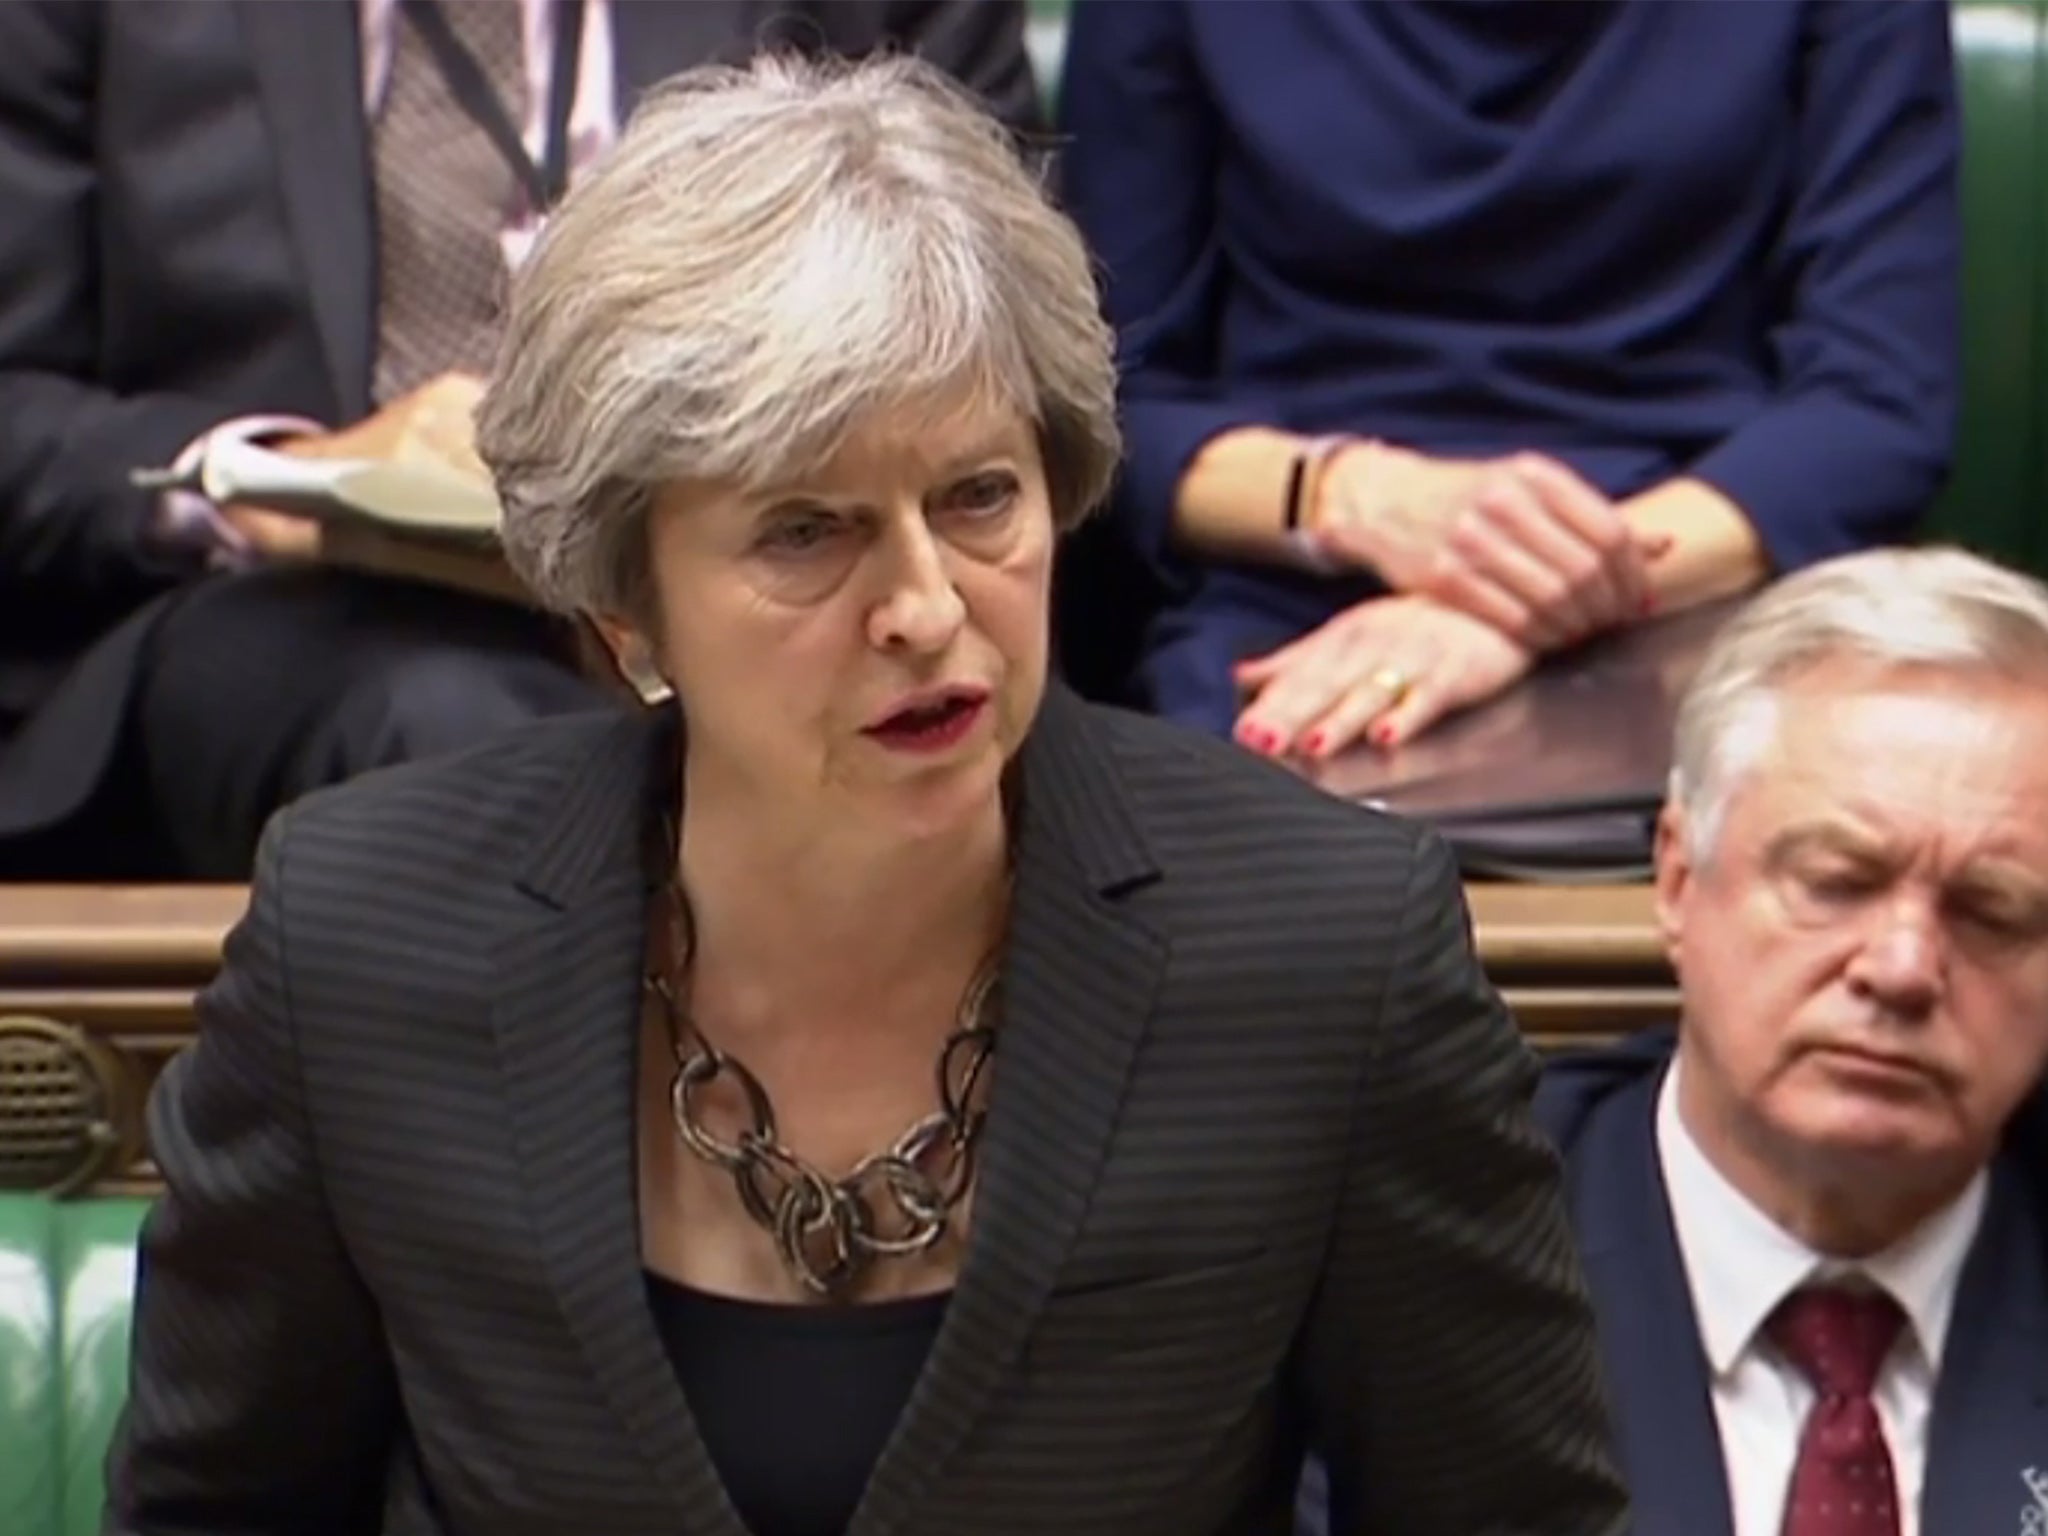 Theresa May is under growing pressure over the size of the divorce bill